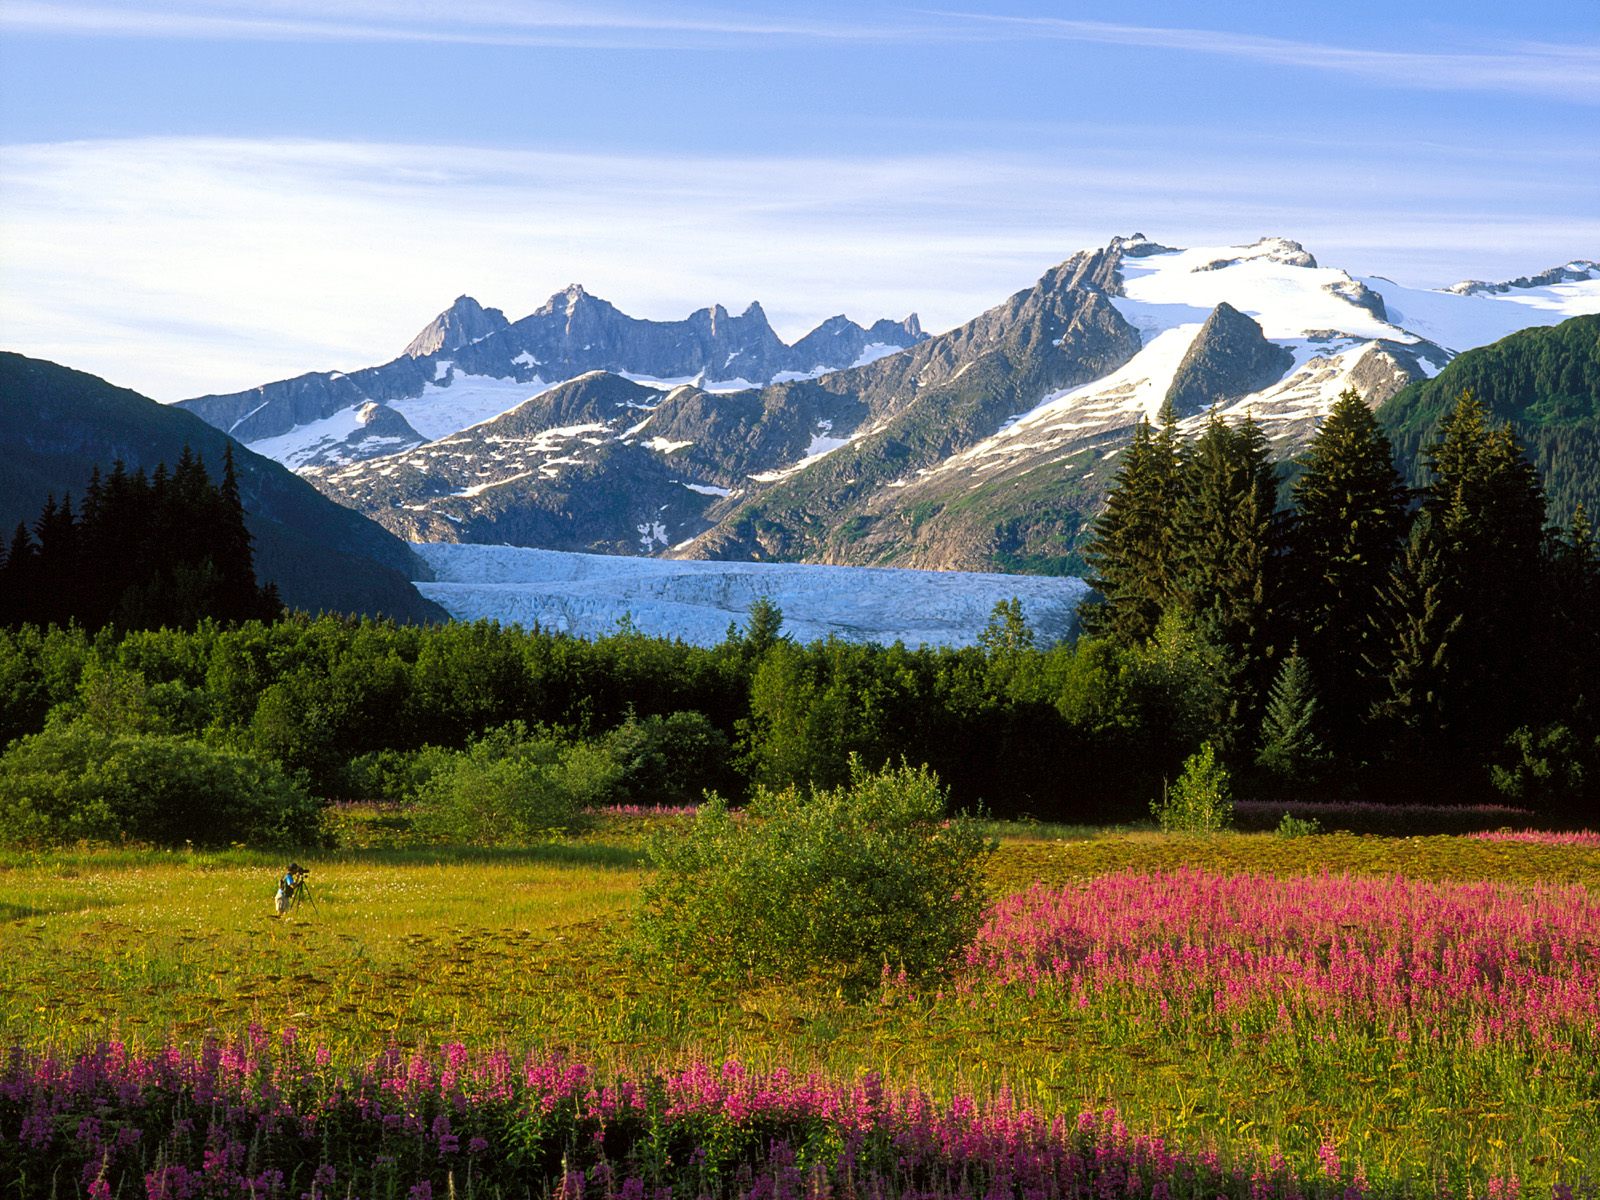 Alaska Has Some Of The Most Incredible Scenery To Be Found In